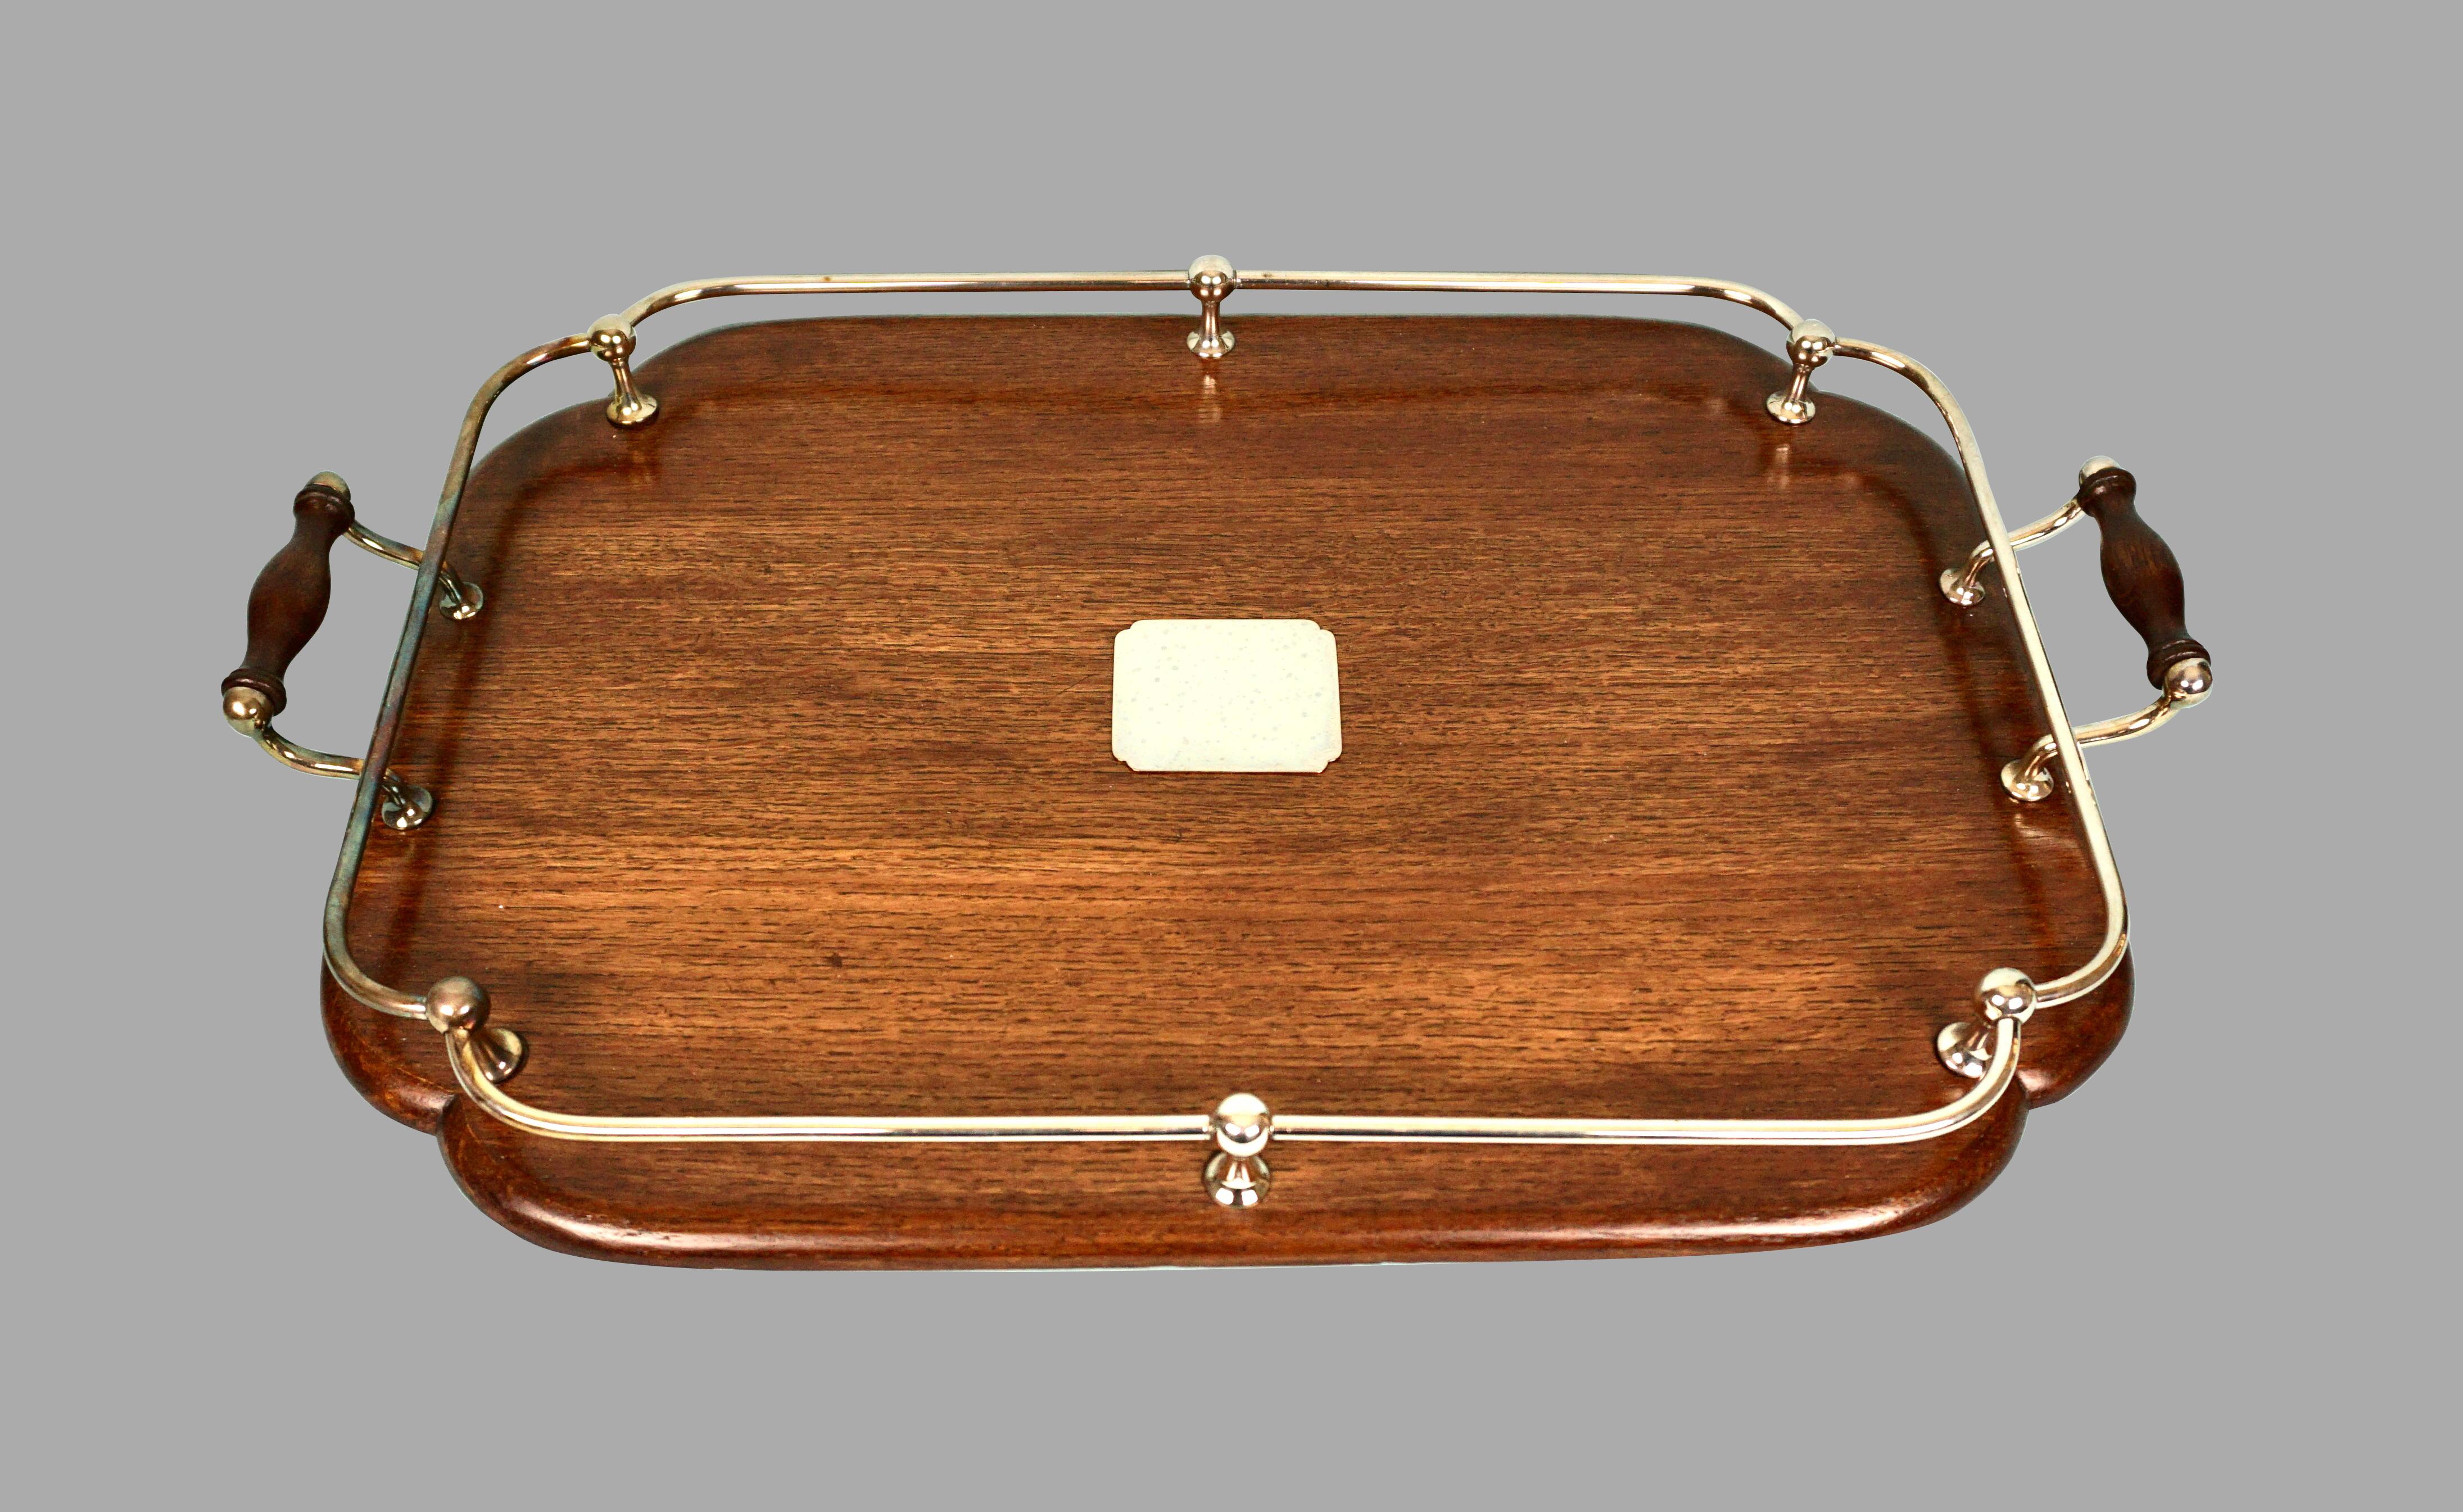 20th Century English Edwardian Mahogany Tray with Silver Plated Handles and Gallery